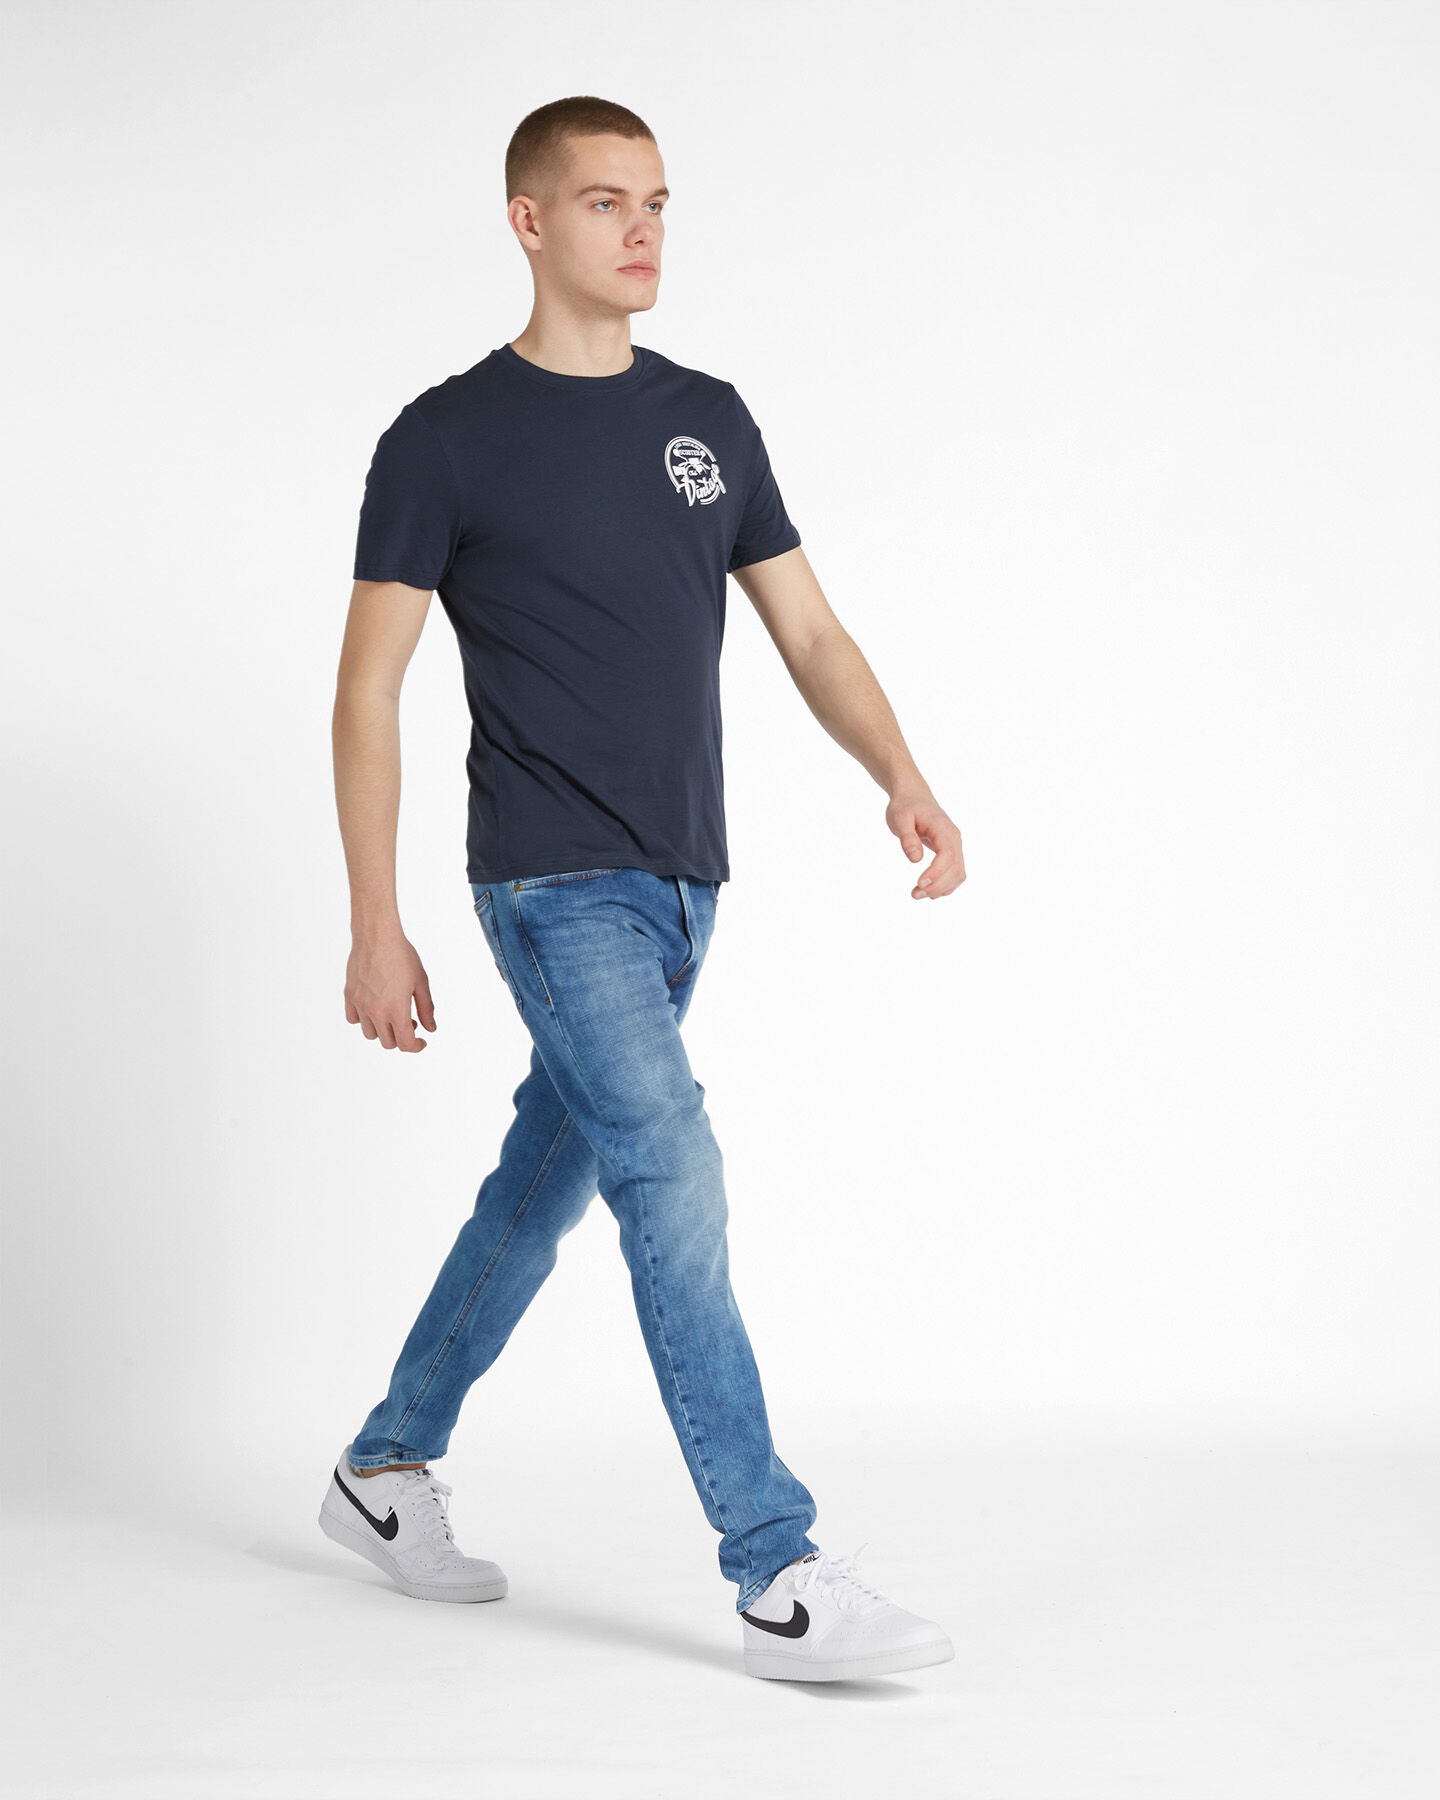  T-Shirt DACK'S BASIC COLLECTION M S4118351|1125|XS scatto 3